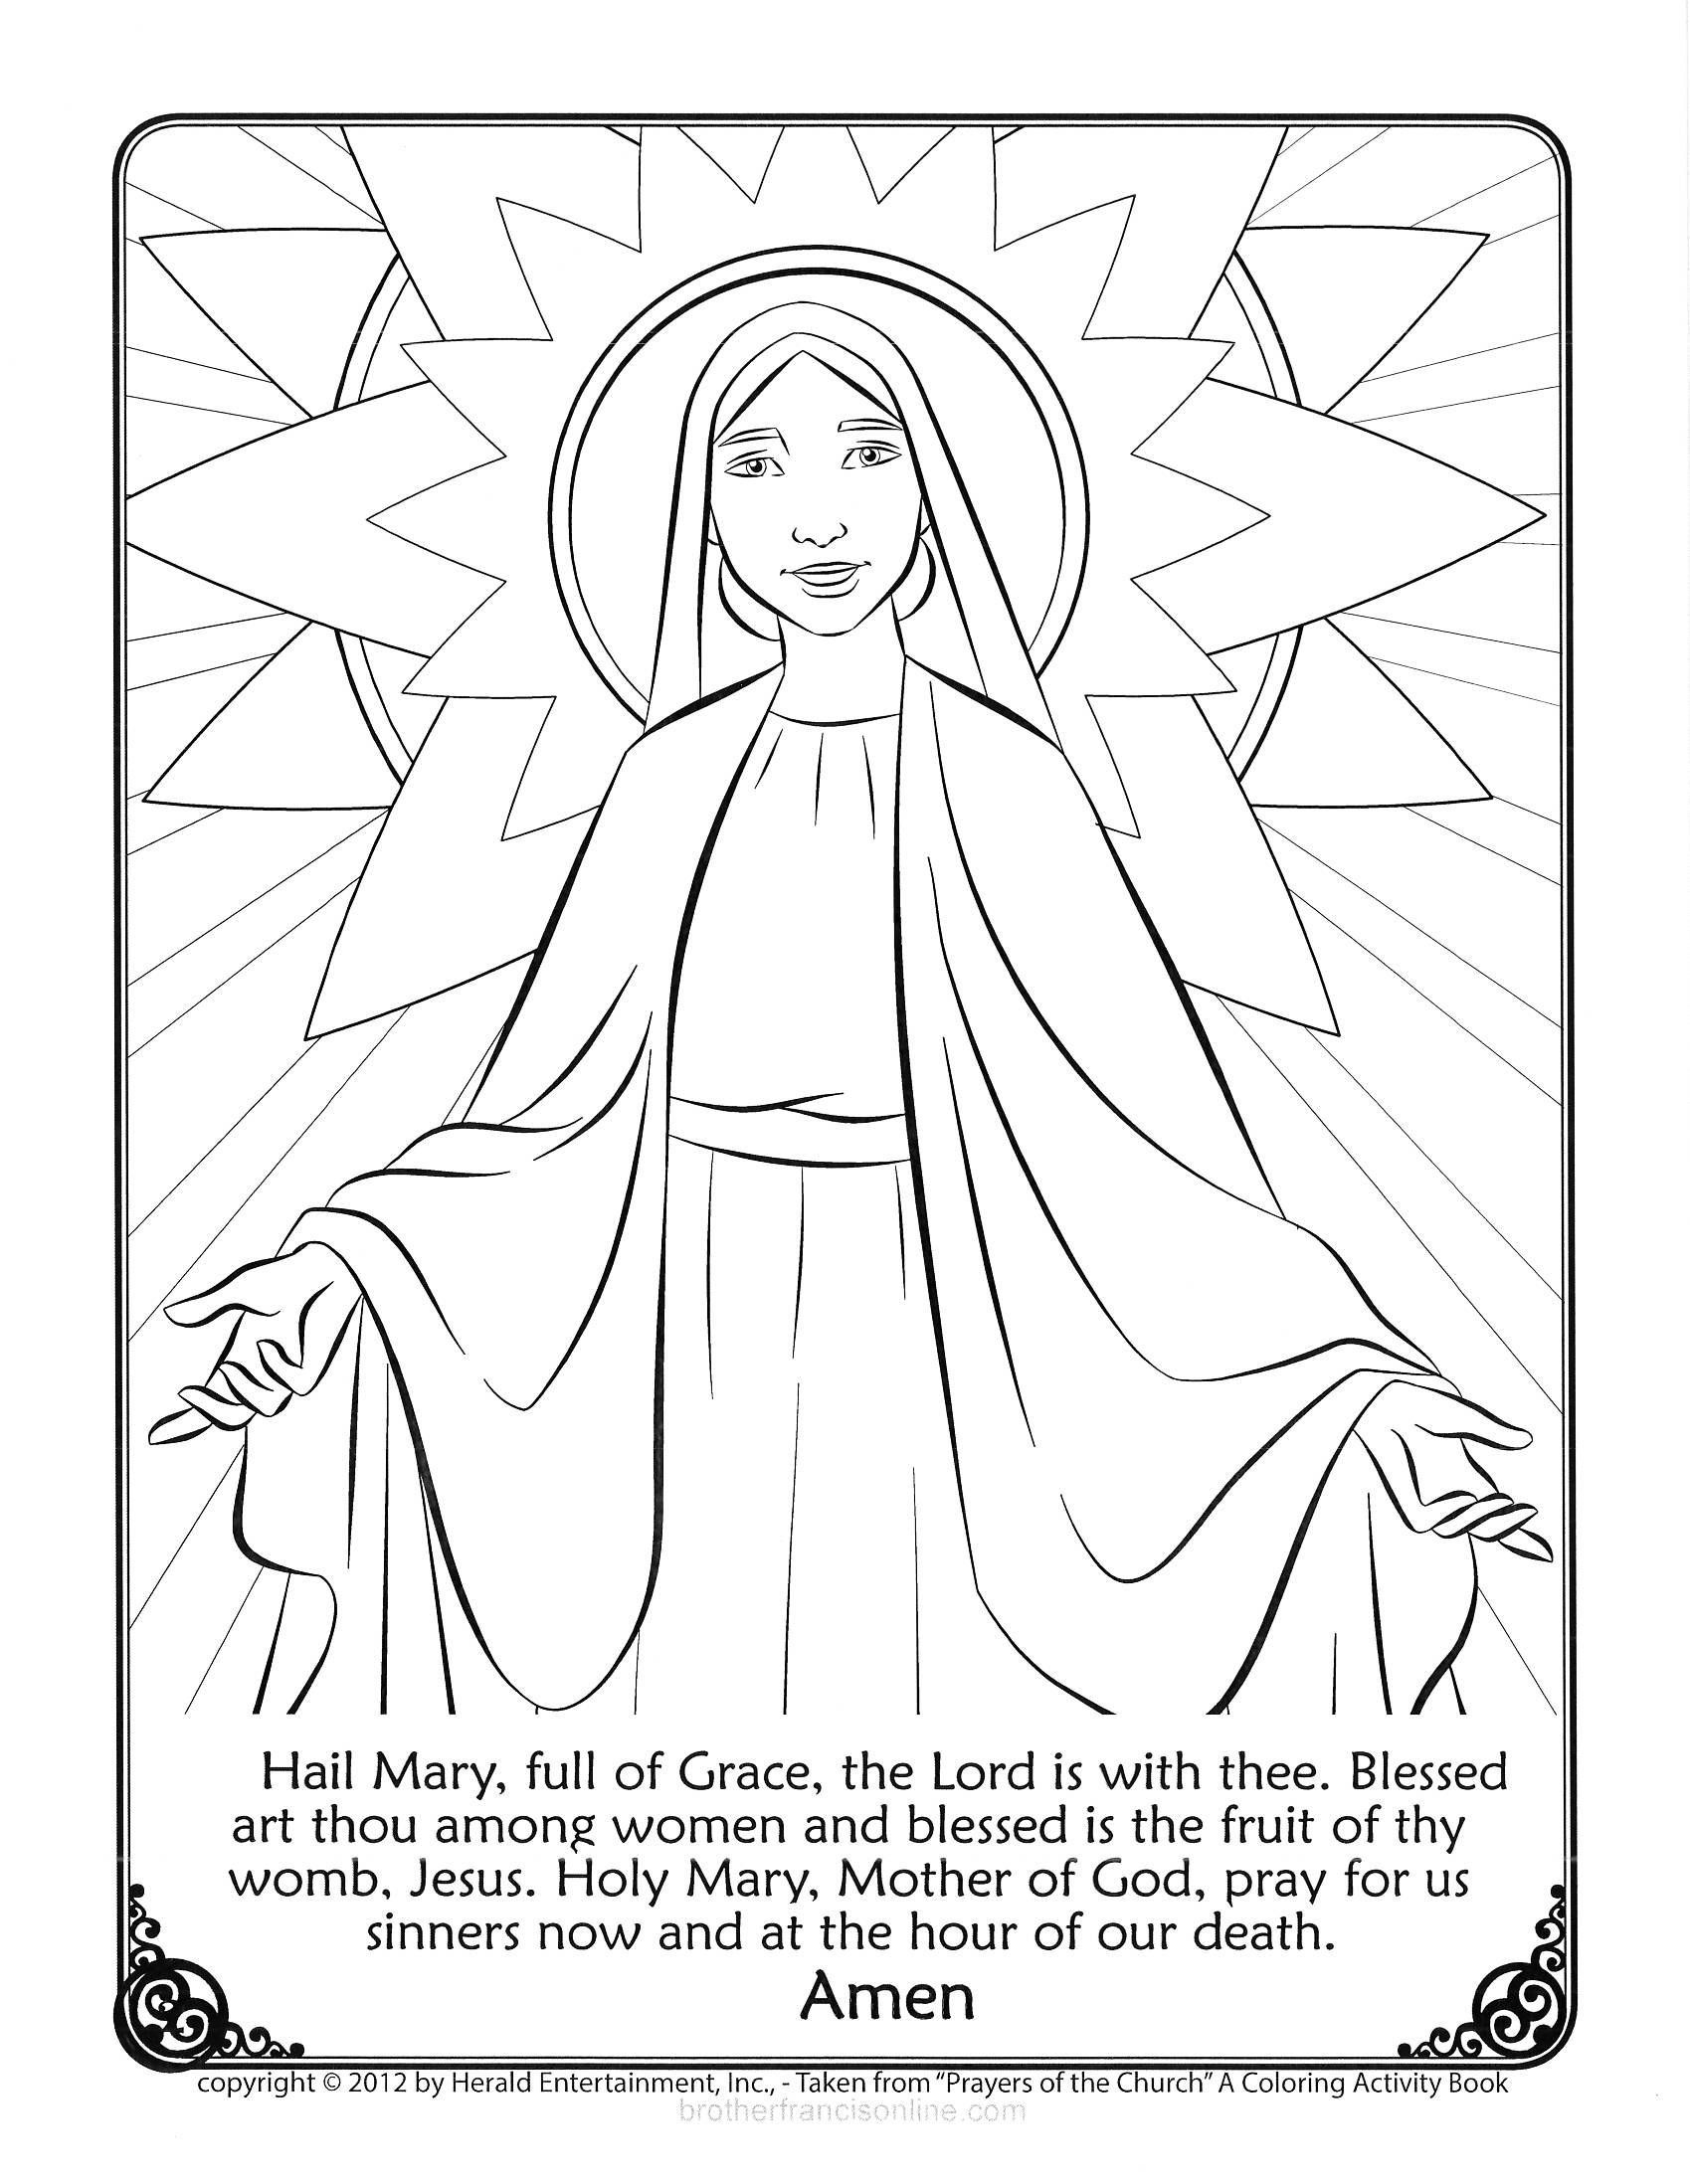 Cool photos of creation coloring sheets check more at httpswwwmercerepcâ coloring pages inspirational captain america coloring pages jesus coloring pages